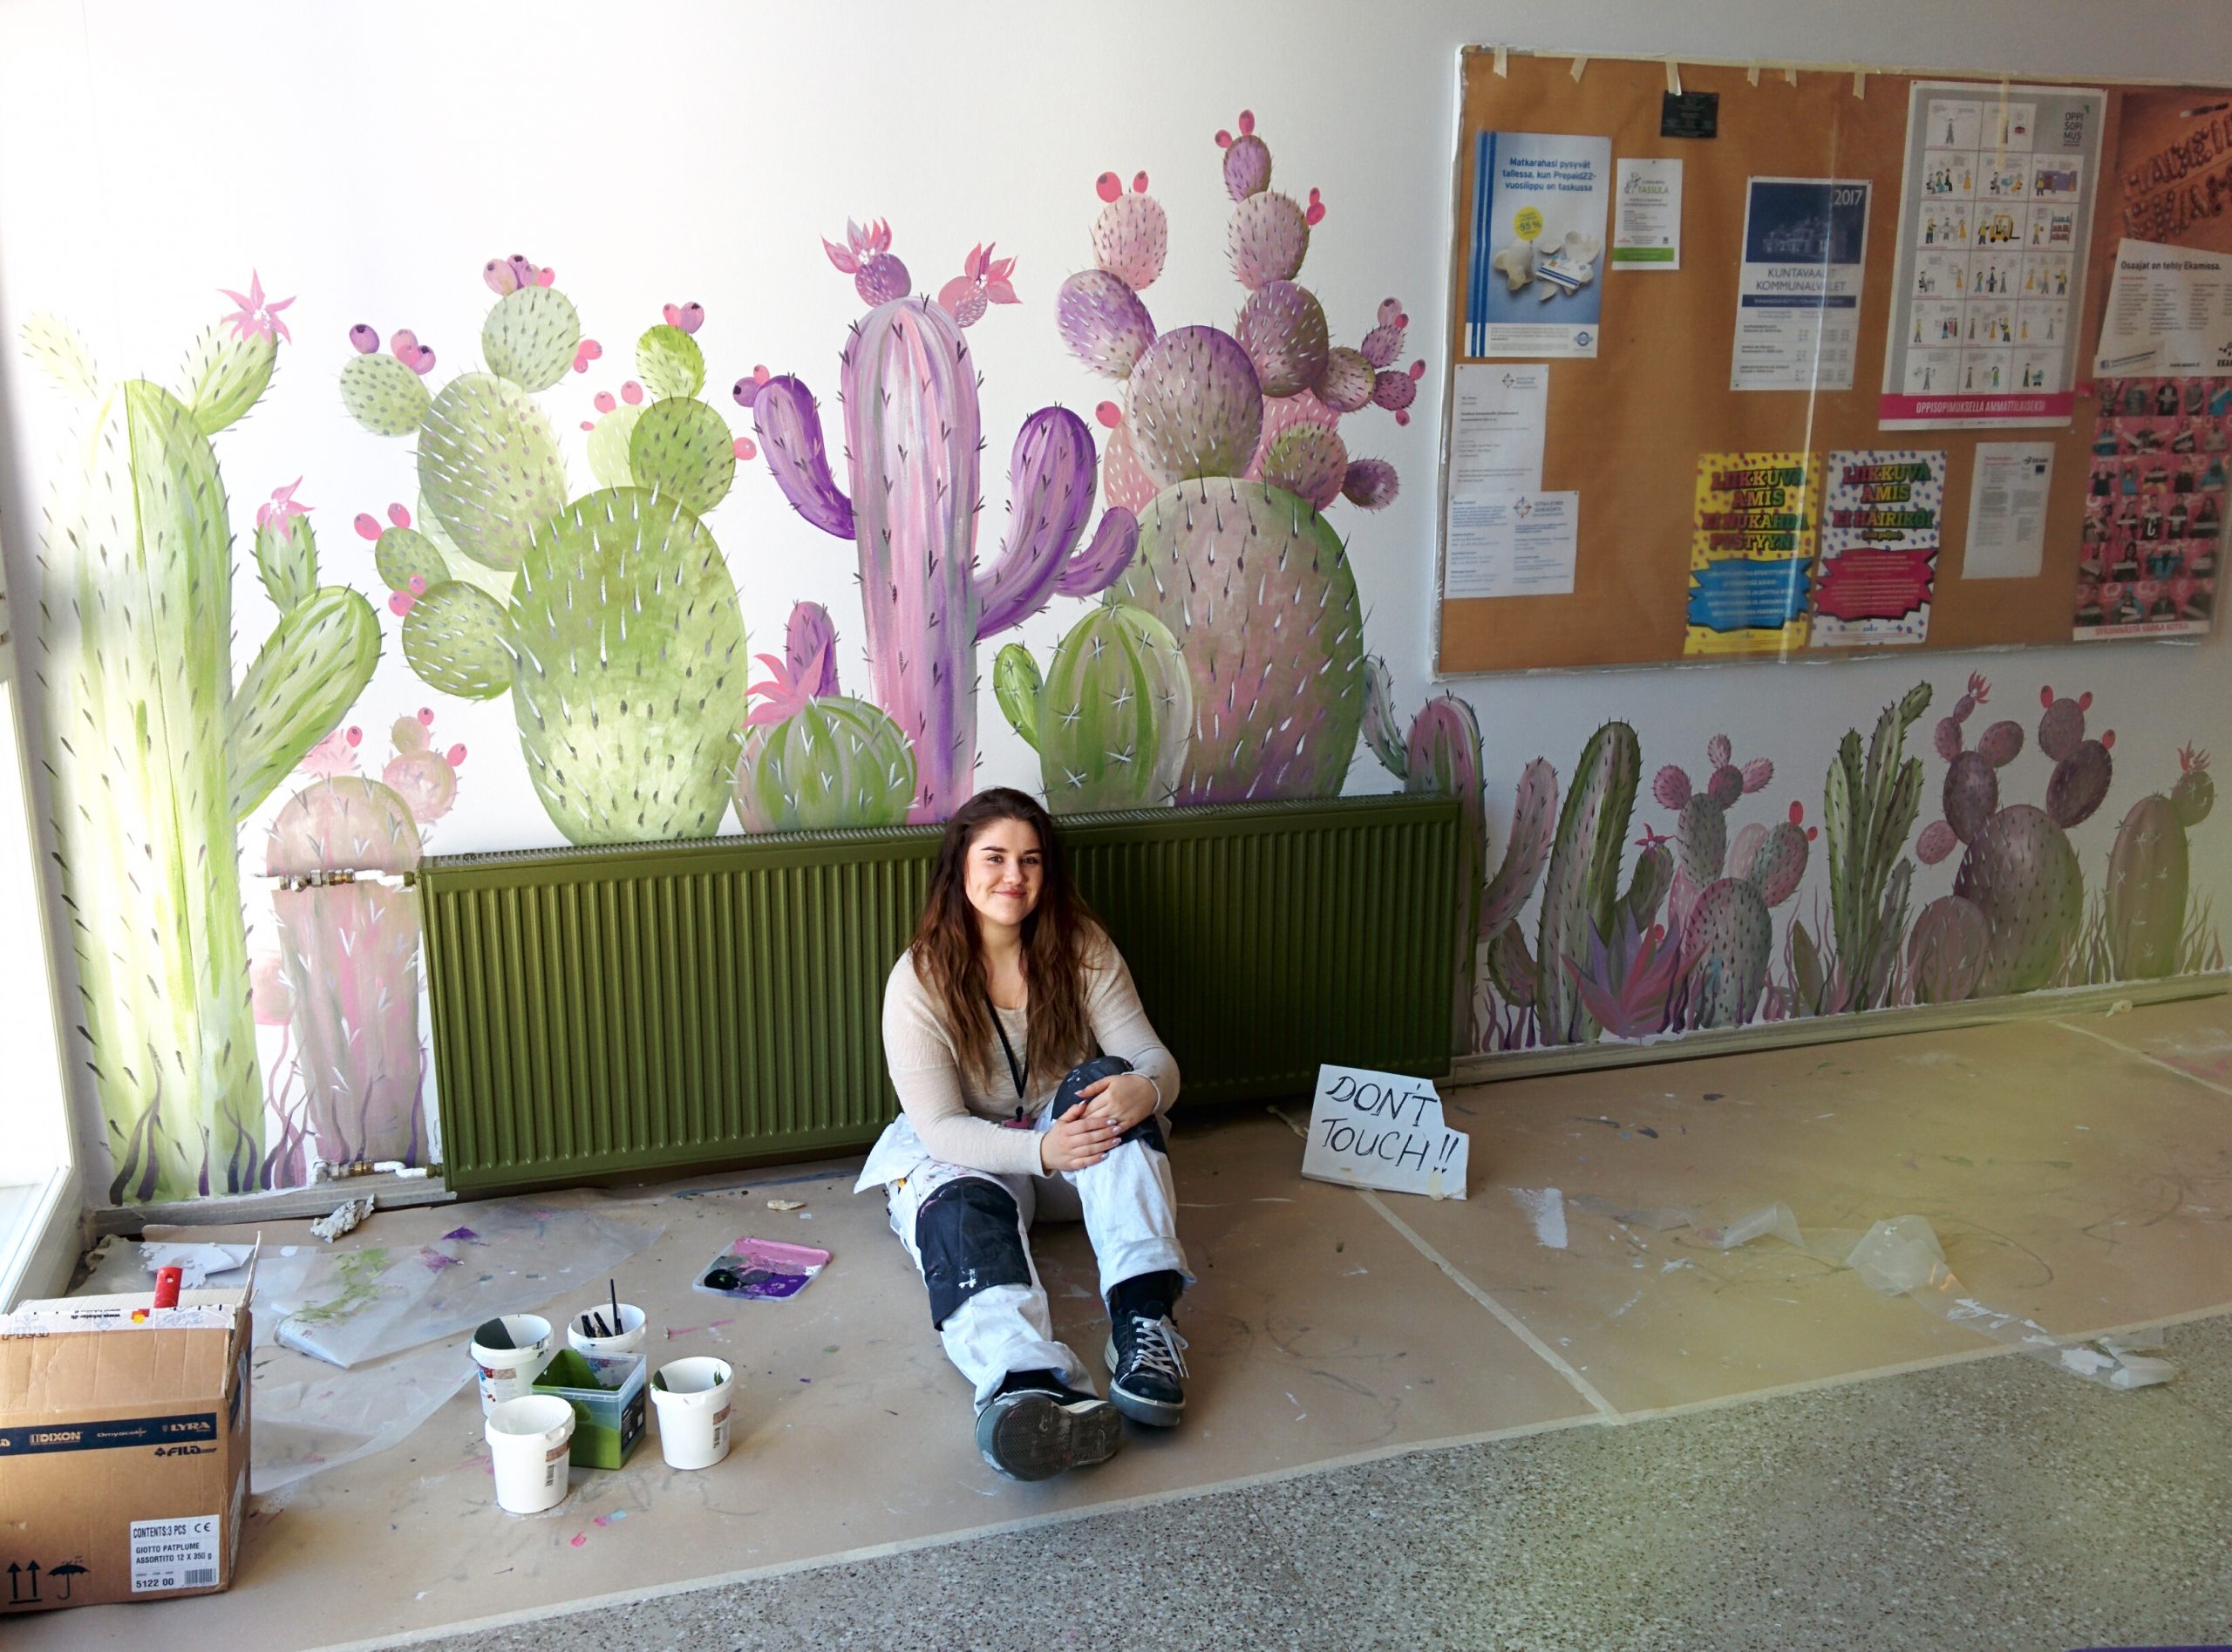 Ocean sitting on the floor near a wall painted with blue and purple cacti